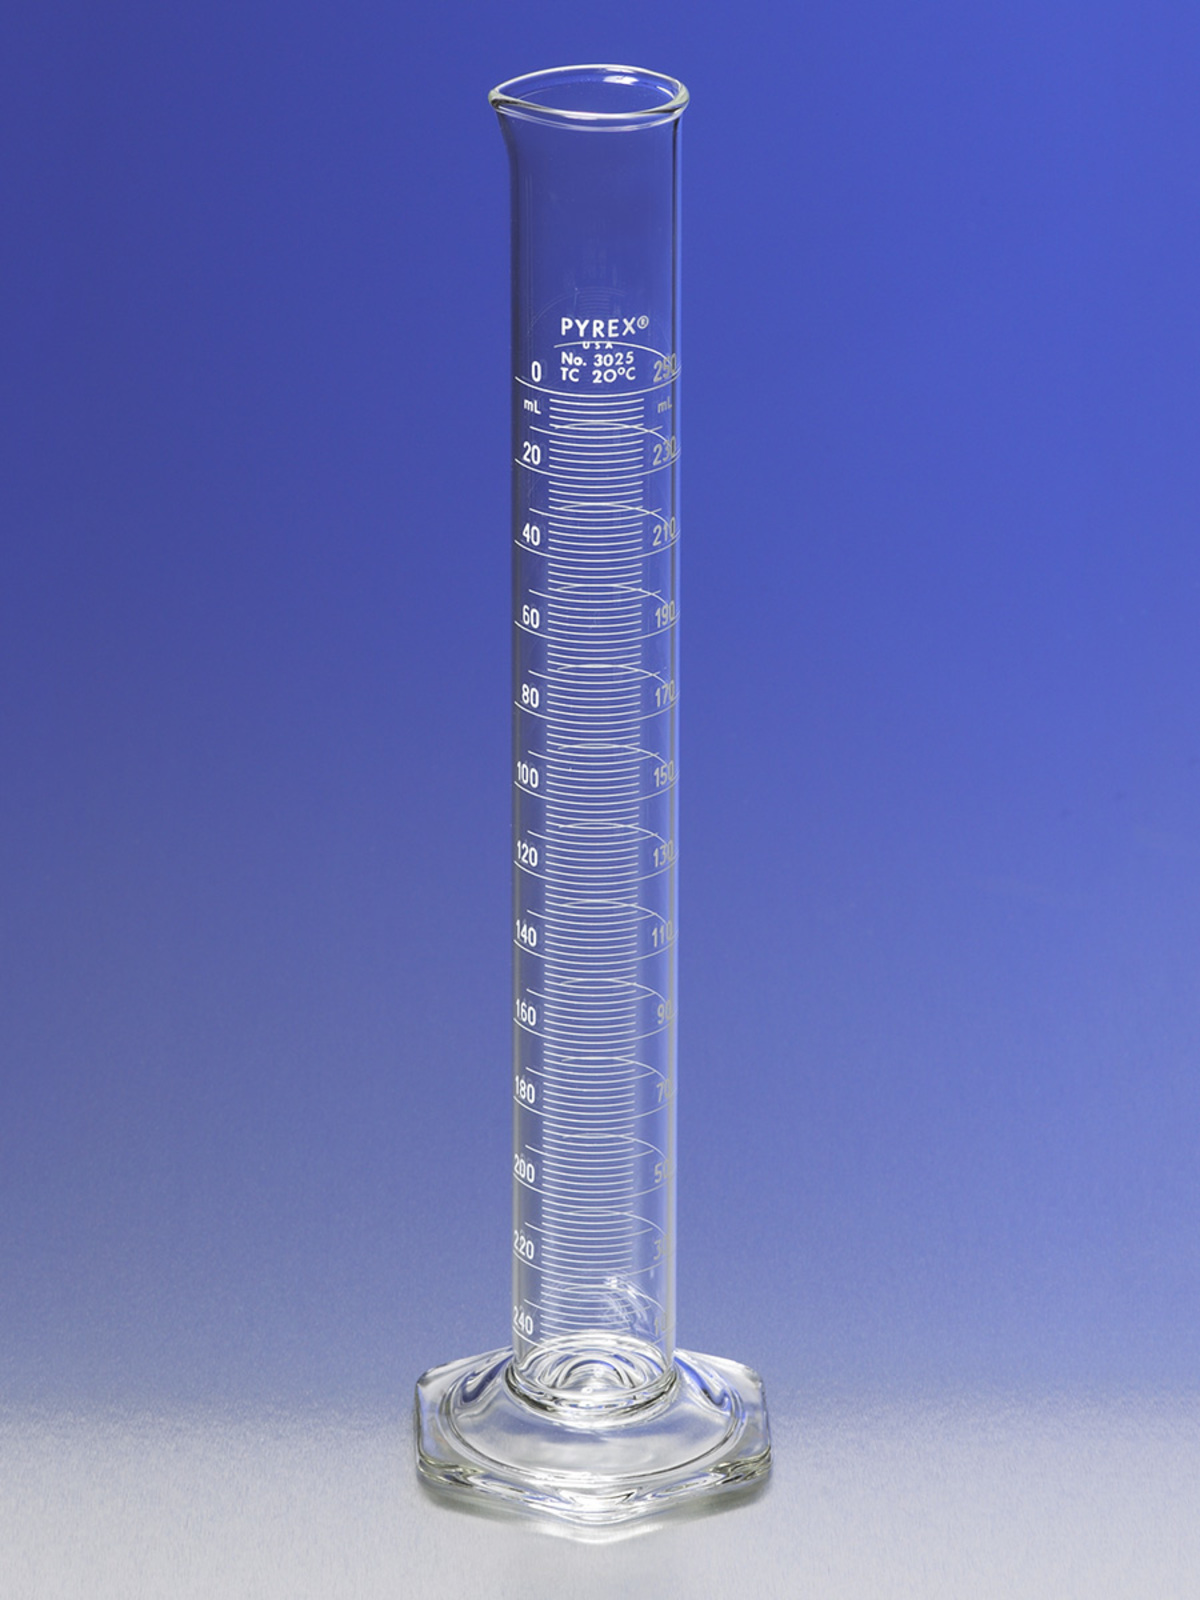 PYREX® Double Metric Scale Cylinders, Class A, To Deliver